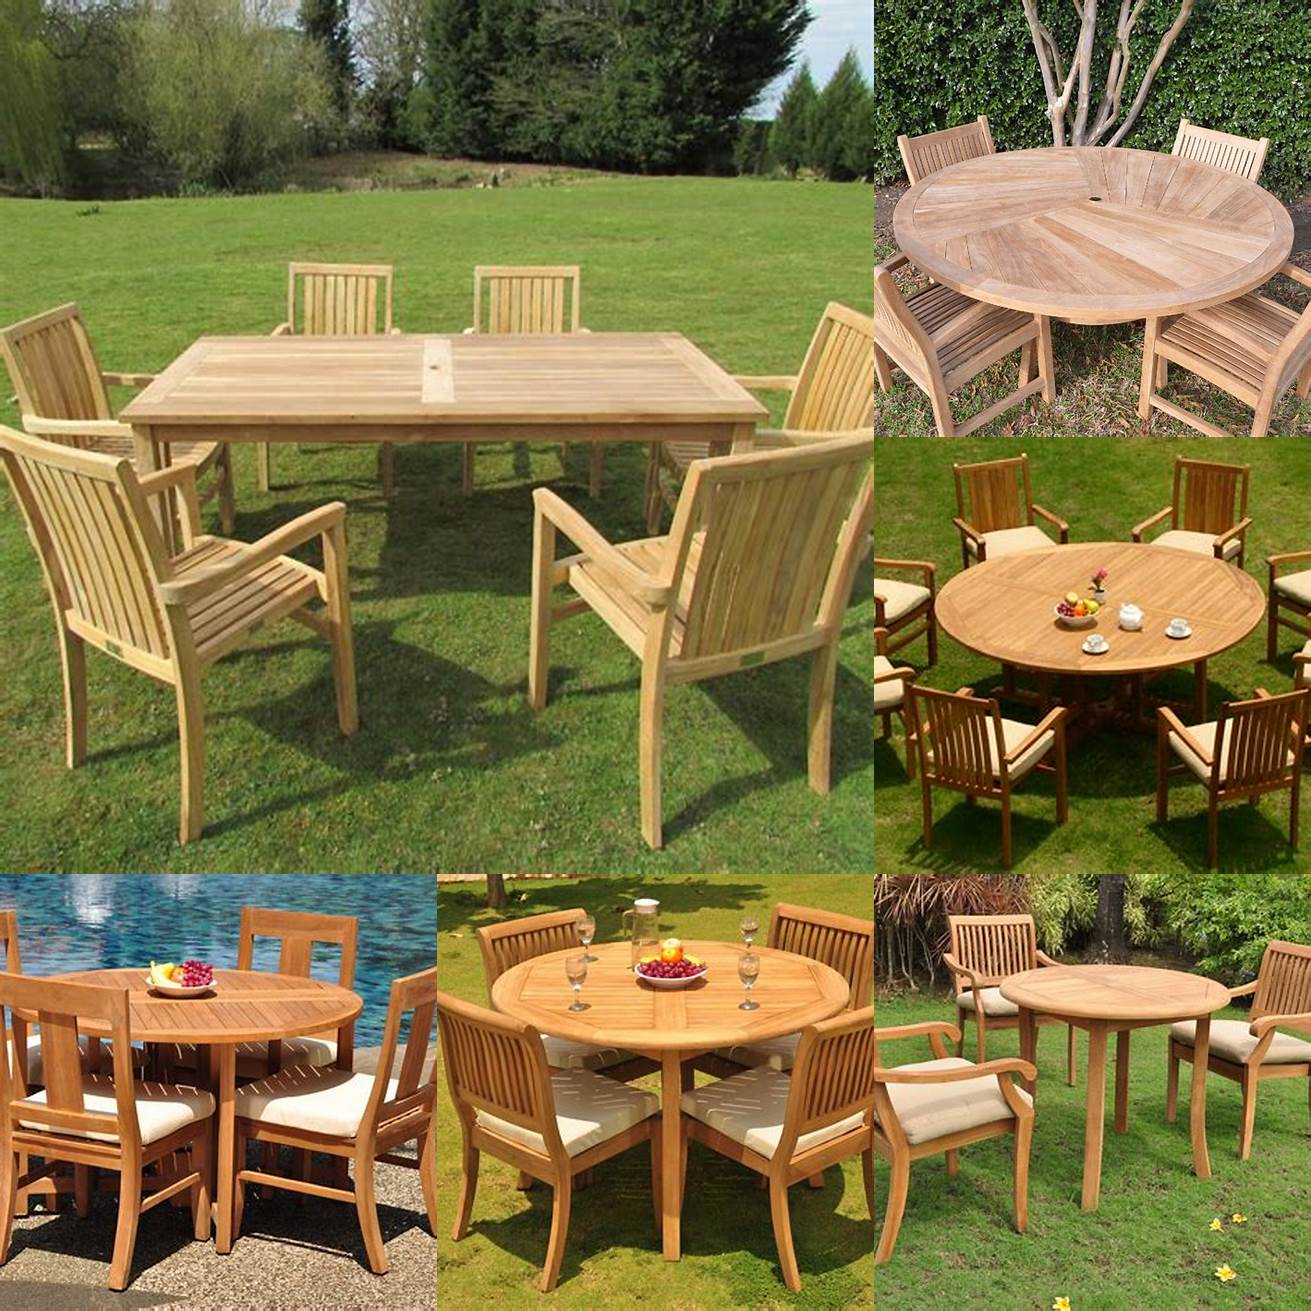 Teak Dining Table and Chairs in a Gazebo